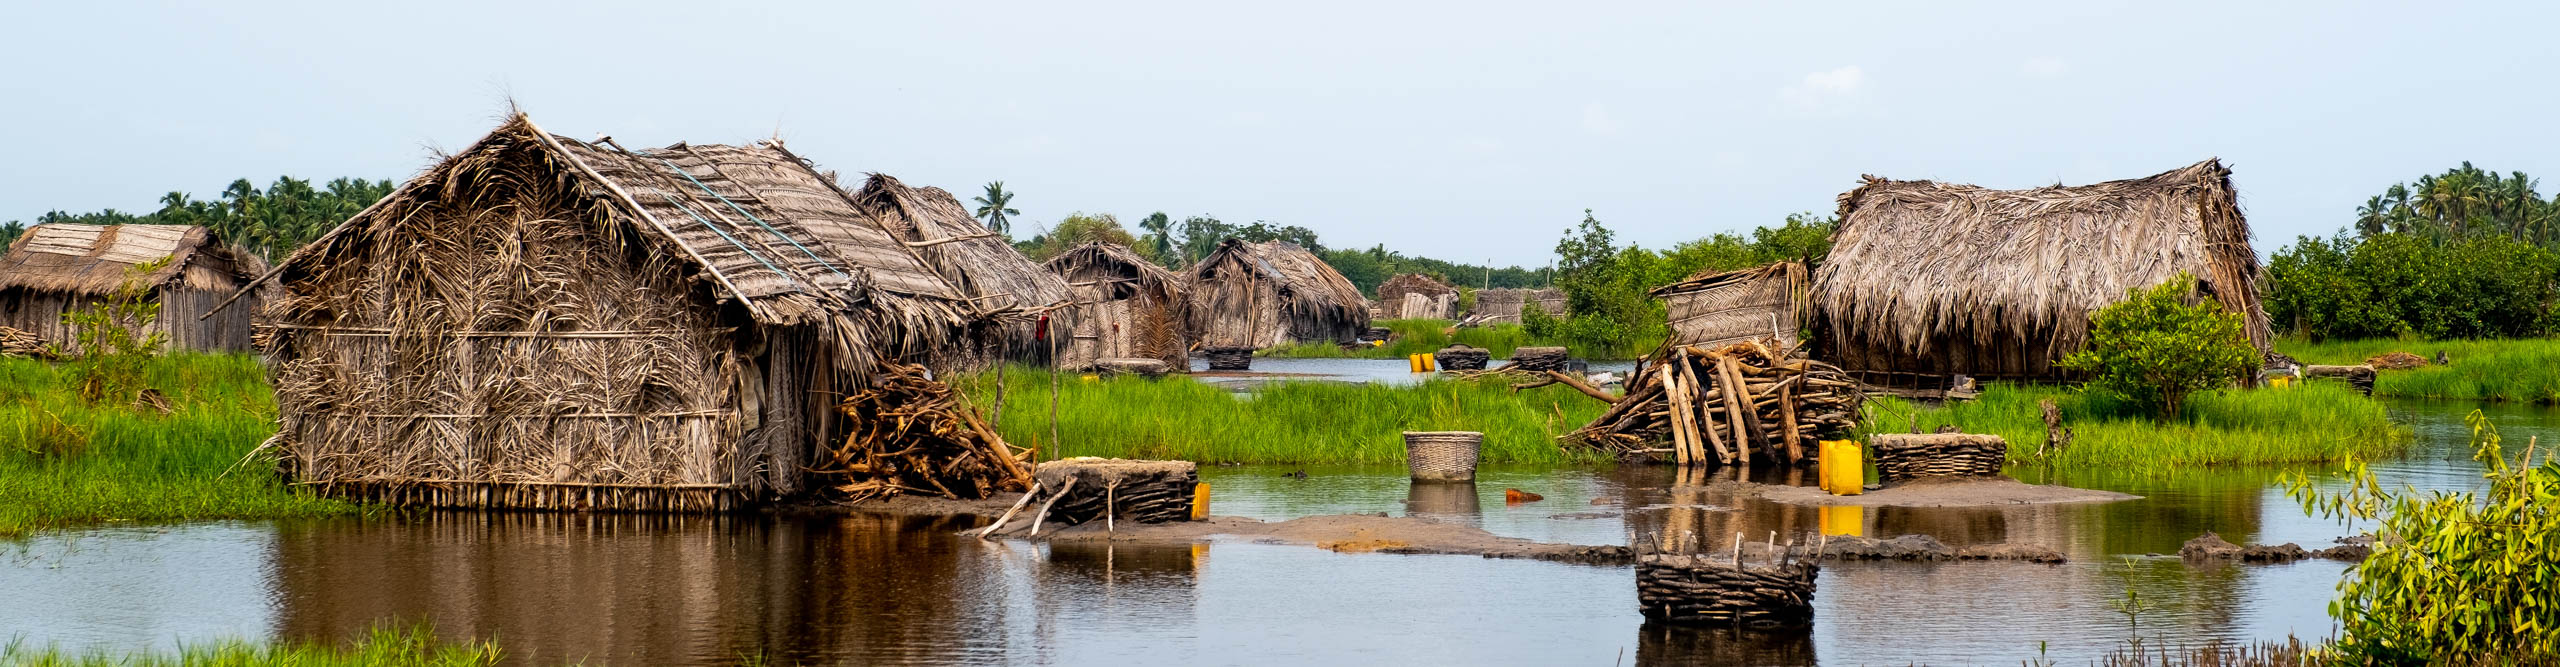 A villager of houses with straw walls and roofs built on the river in. Benin, West Africa 